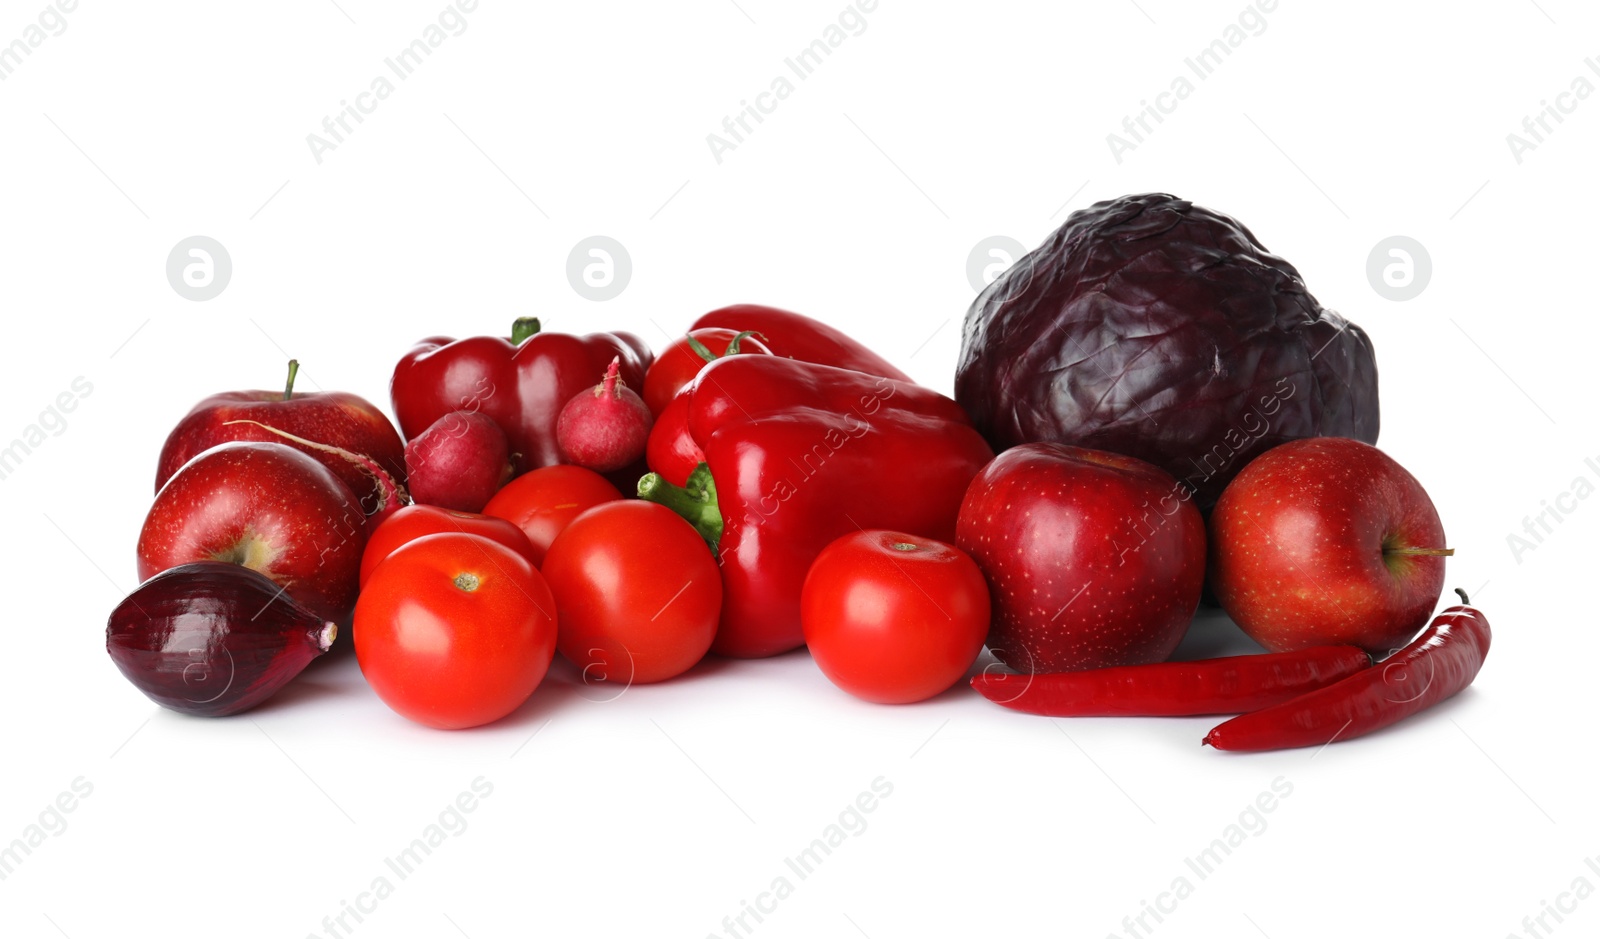 Photo of Pile of fresh fruits and vegetables isolated on white